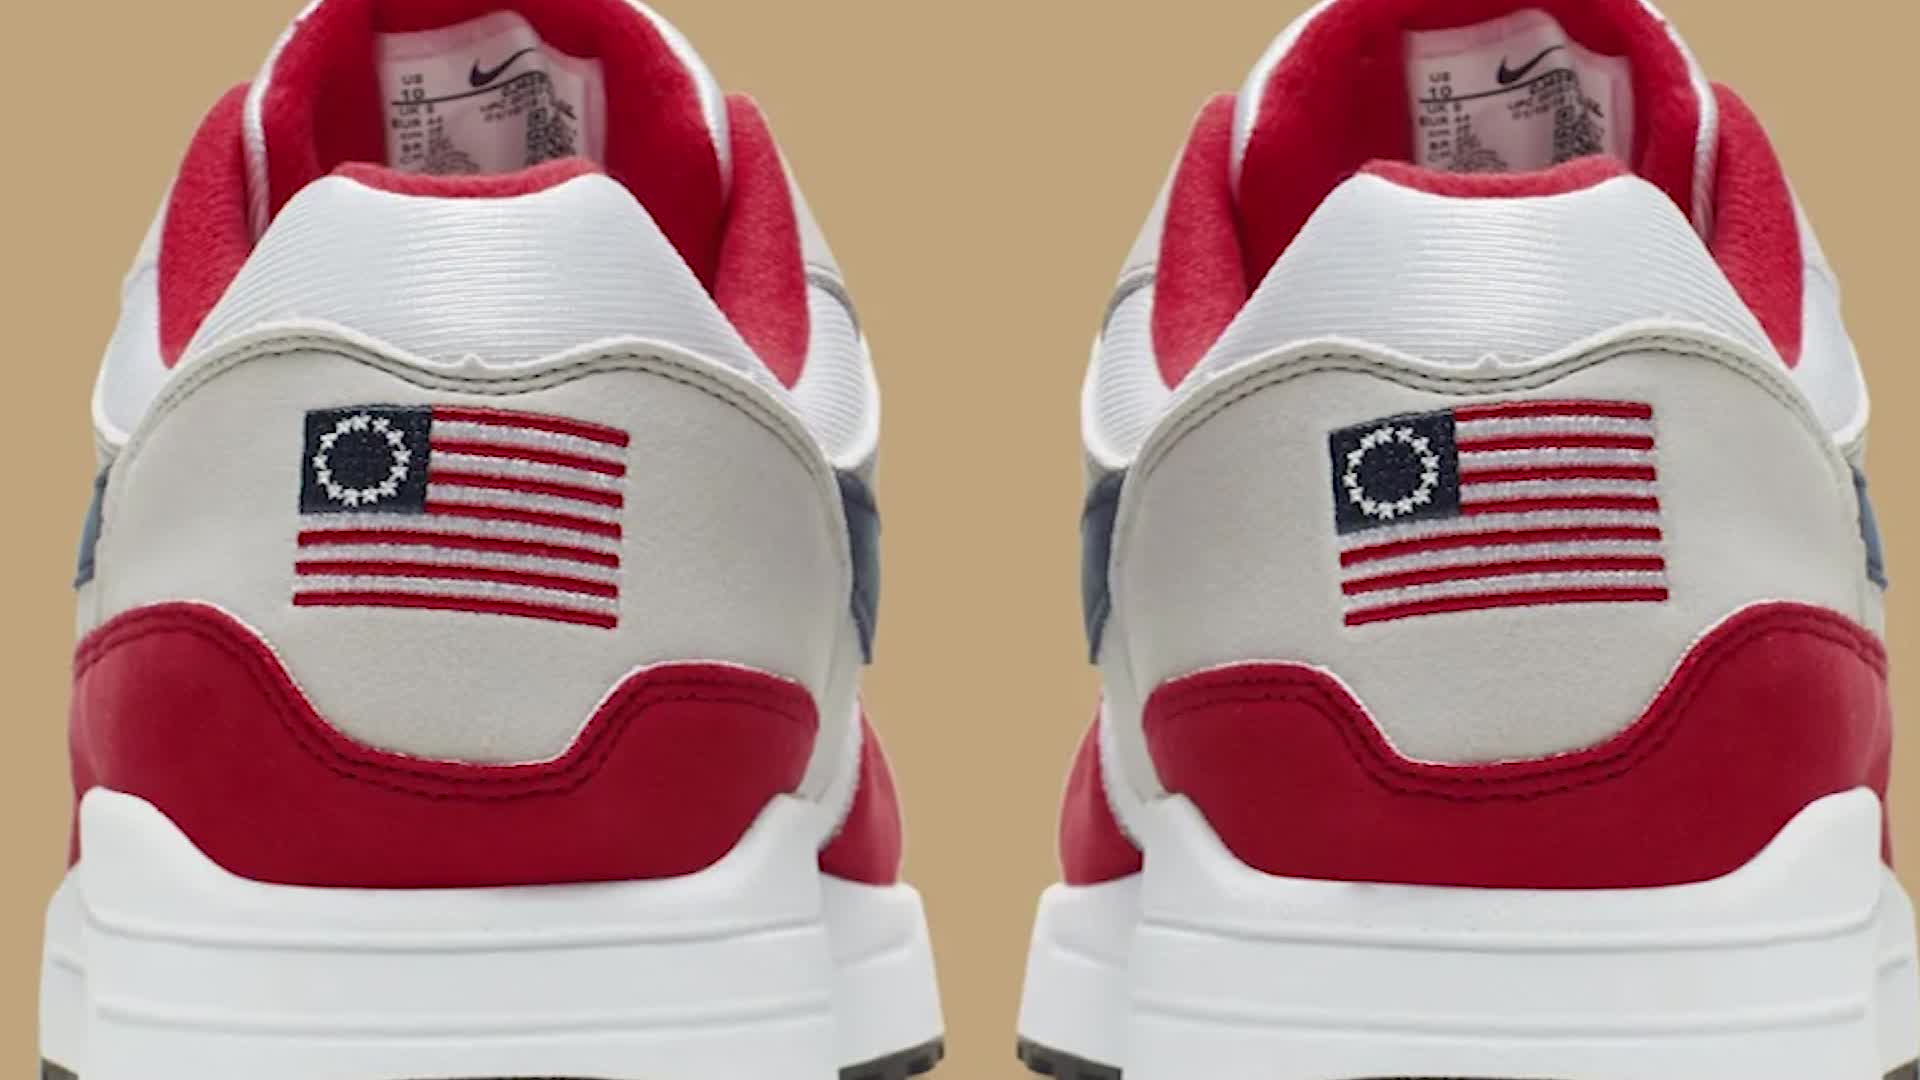 Nike featuring Betsy Ross flag after backlash | Business